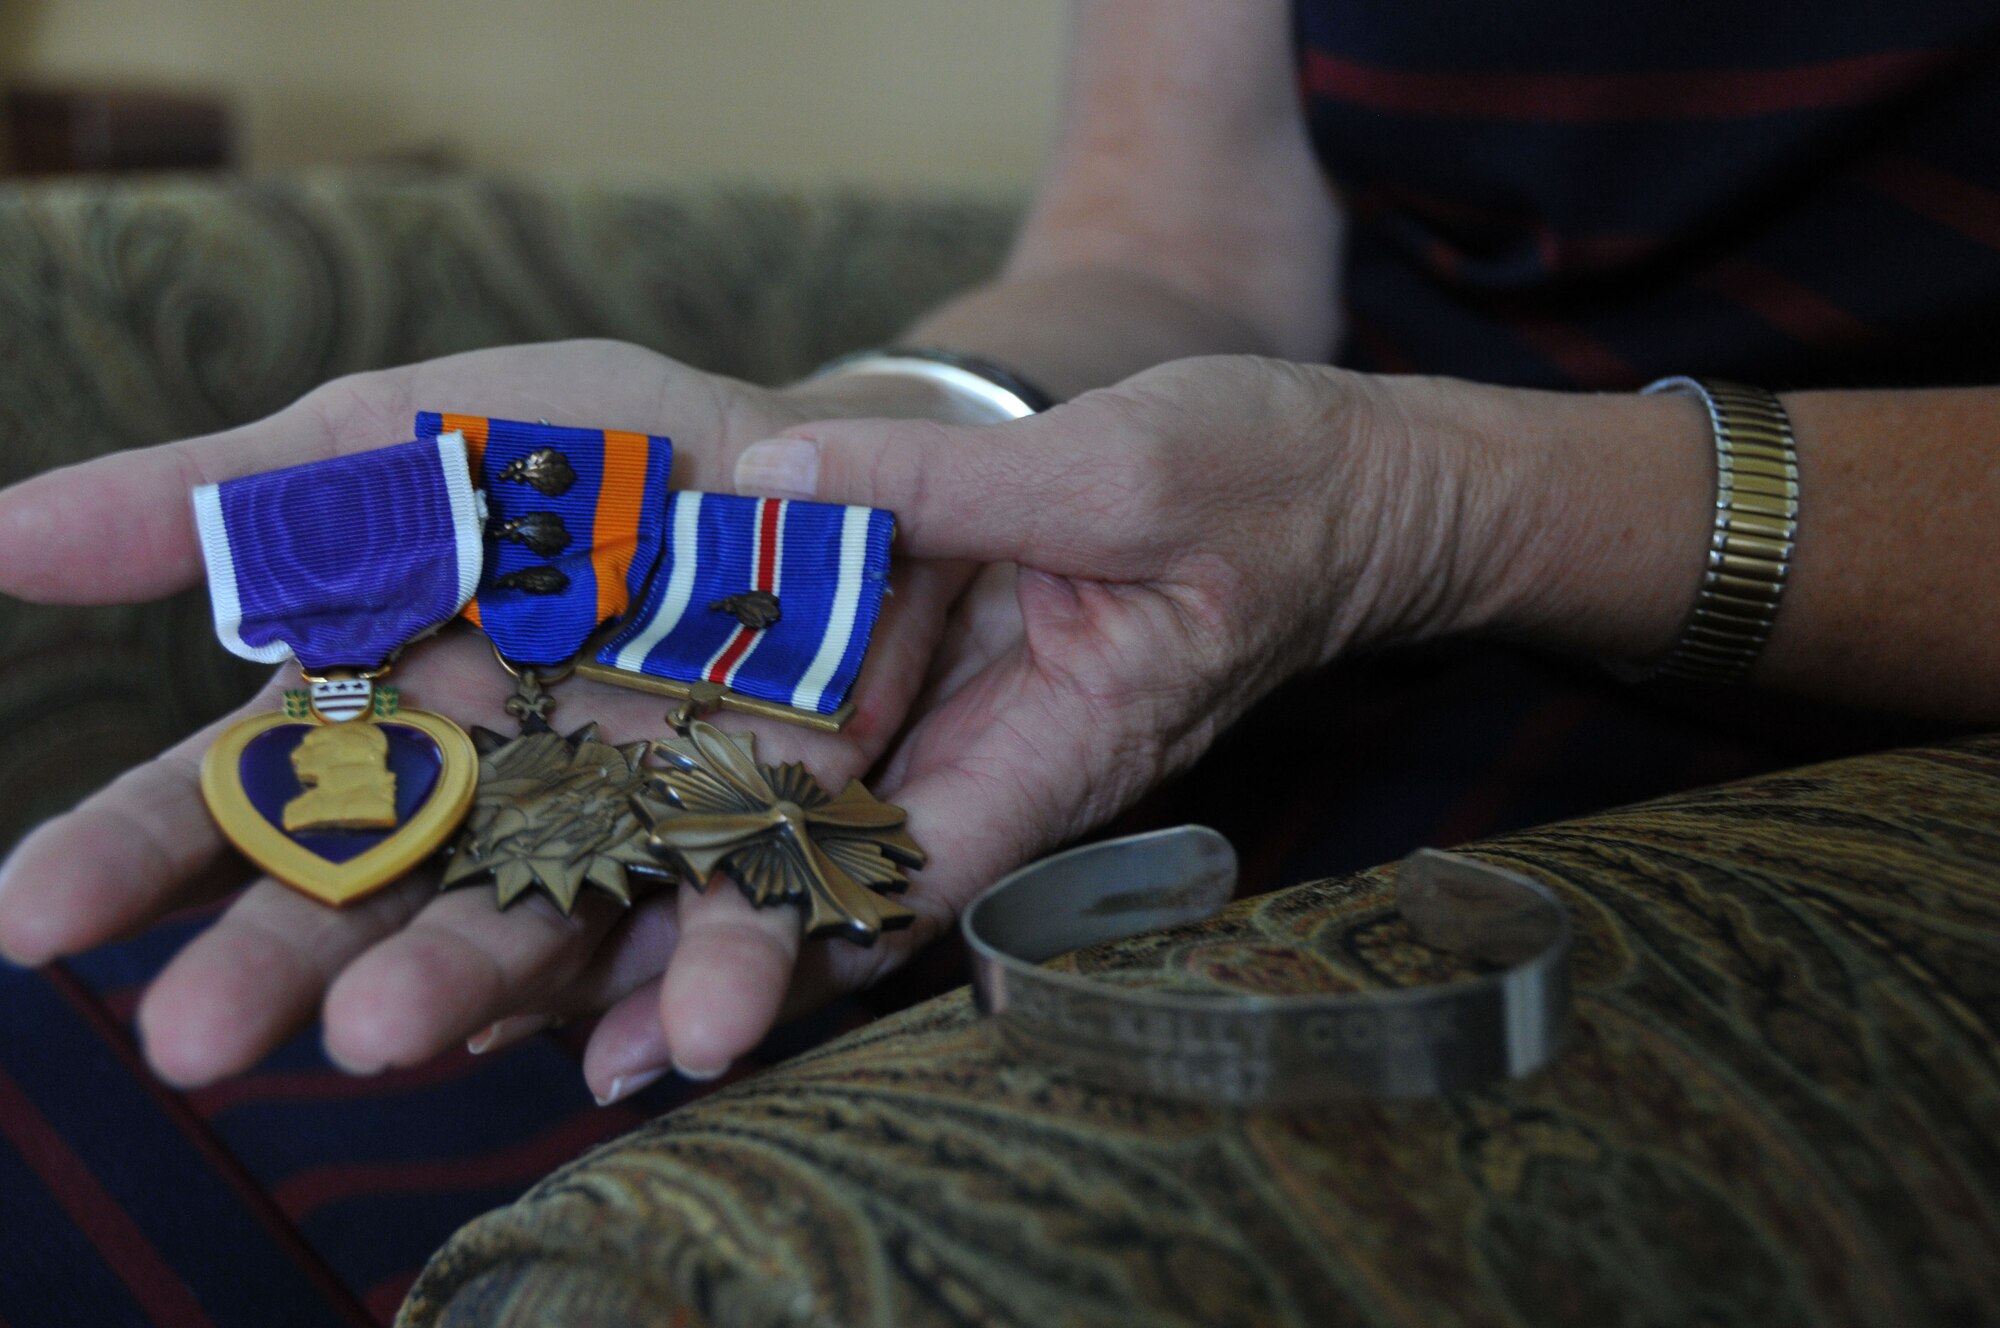 Maureen Kozak holds her father’s medals and displays a prisoner-of-war/missing-in-action bracelet bearing his name. Col. Kelly F. Cook was a fighter pilot who was listed as MIA in Vietnam and was later declared killed in action, body not recovered. Cook’s medals include a Purple Heart, two Distinguished Flying Crosses and four Air Medals. Maureen has corresponded with several supporters across the nation who have worn a POW/MIA bracelet with her father’s name on it, including a family she sends a Christmas card to every year. Maureen wore her bracelet as a teenager through adulthood until it broke; it’s now stored for safekeeping. (U.S. Air Force photo/Staff Sgt. Mercedes Crossland)